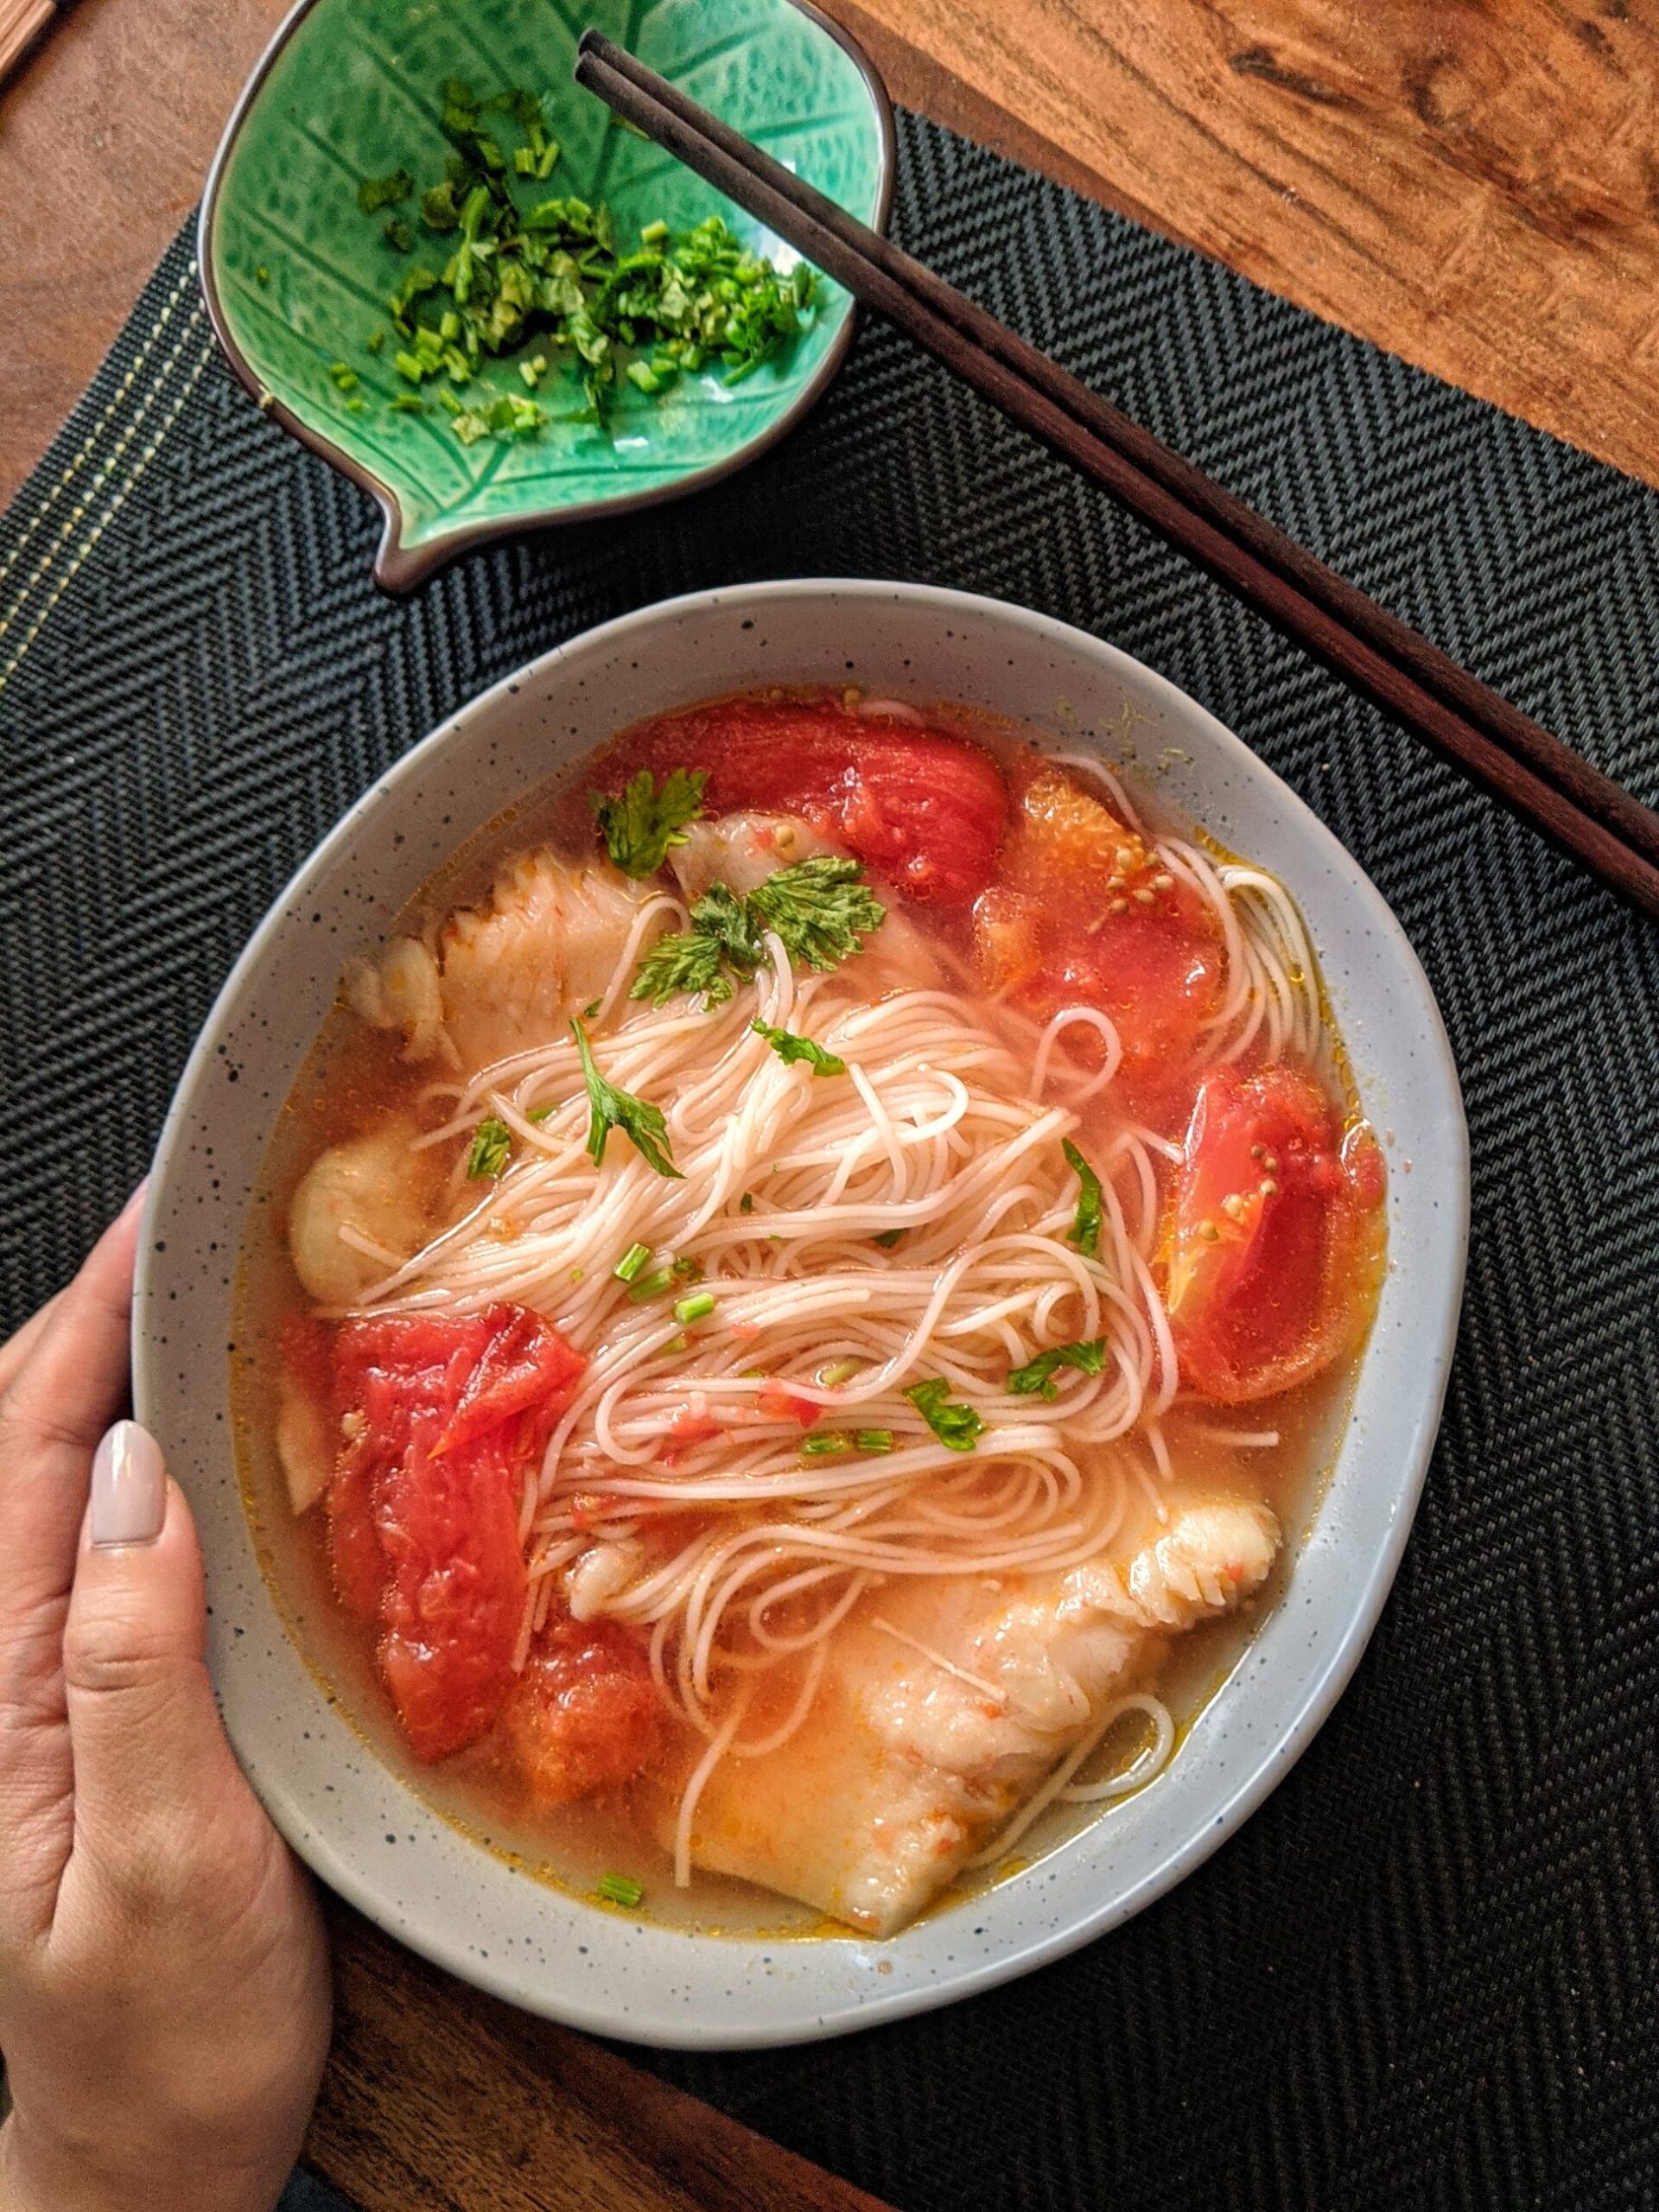  The hearty chunks of fish blend perfectly with the sweet and sour broth